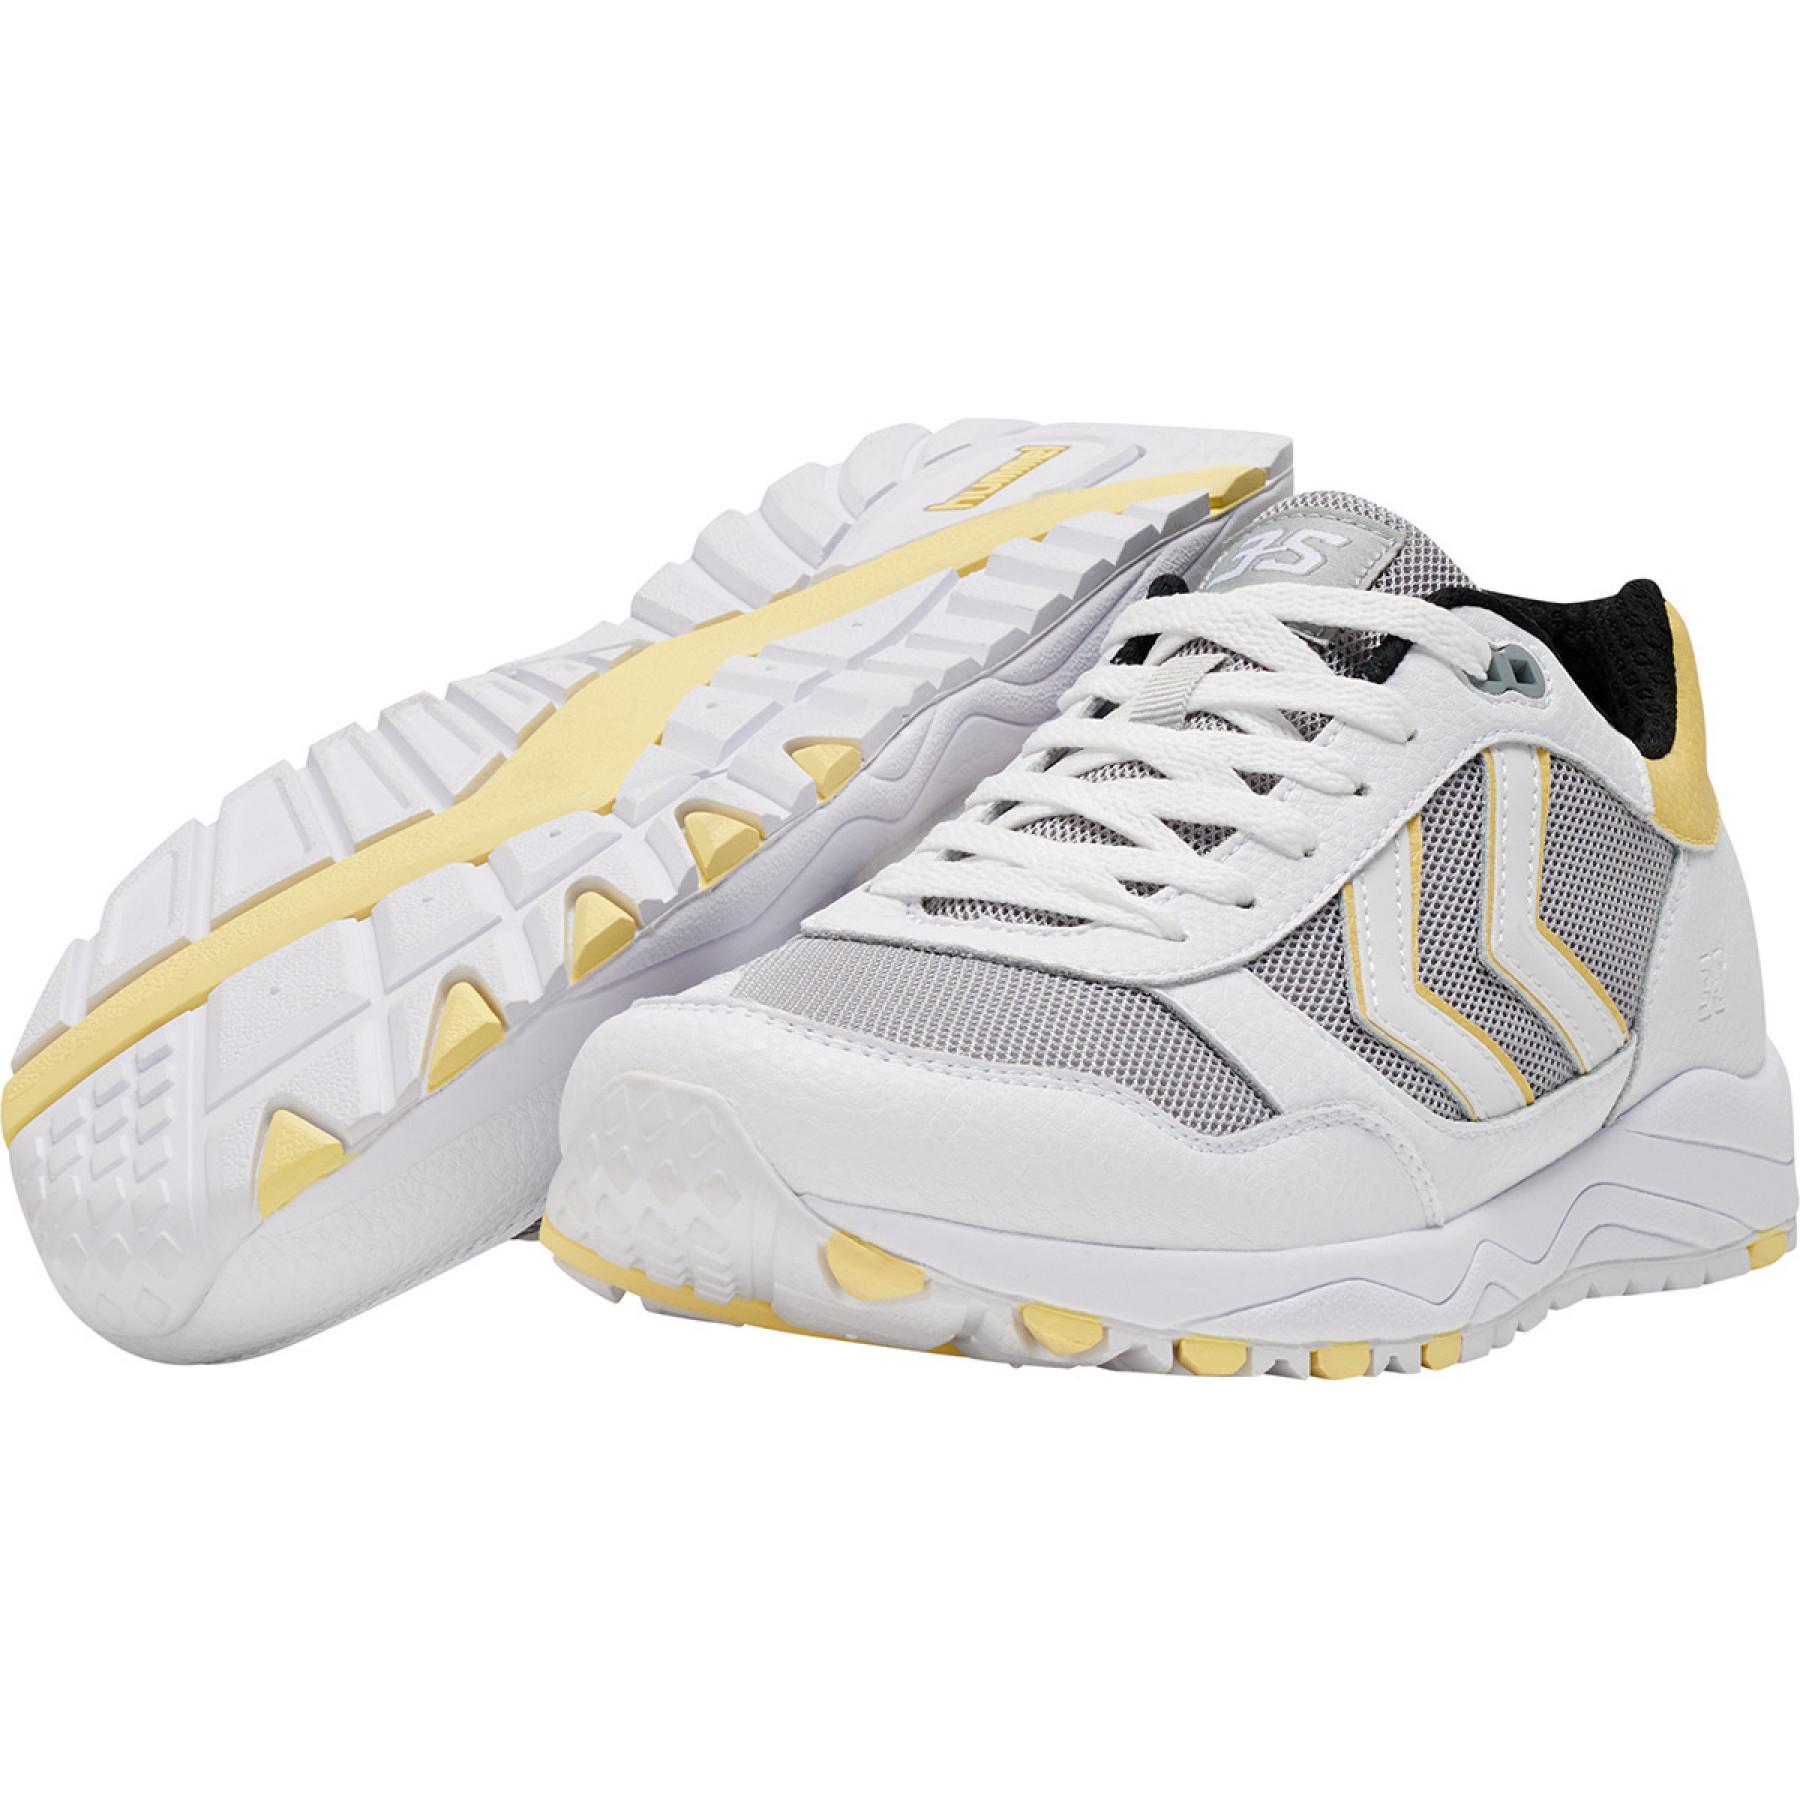 Trainers Hummel 3s sport leather